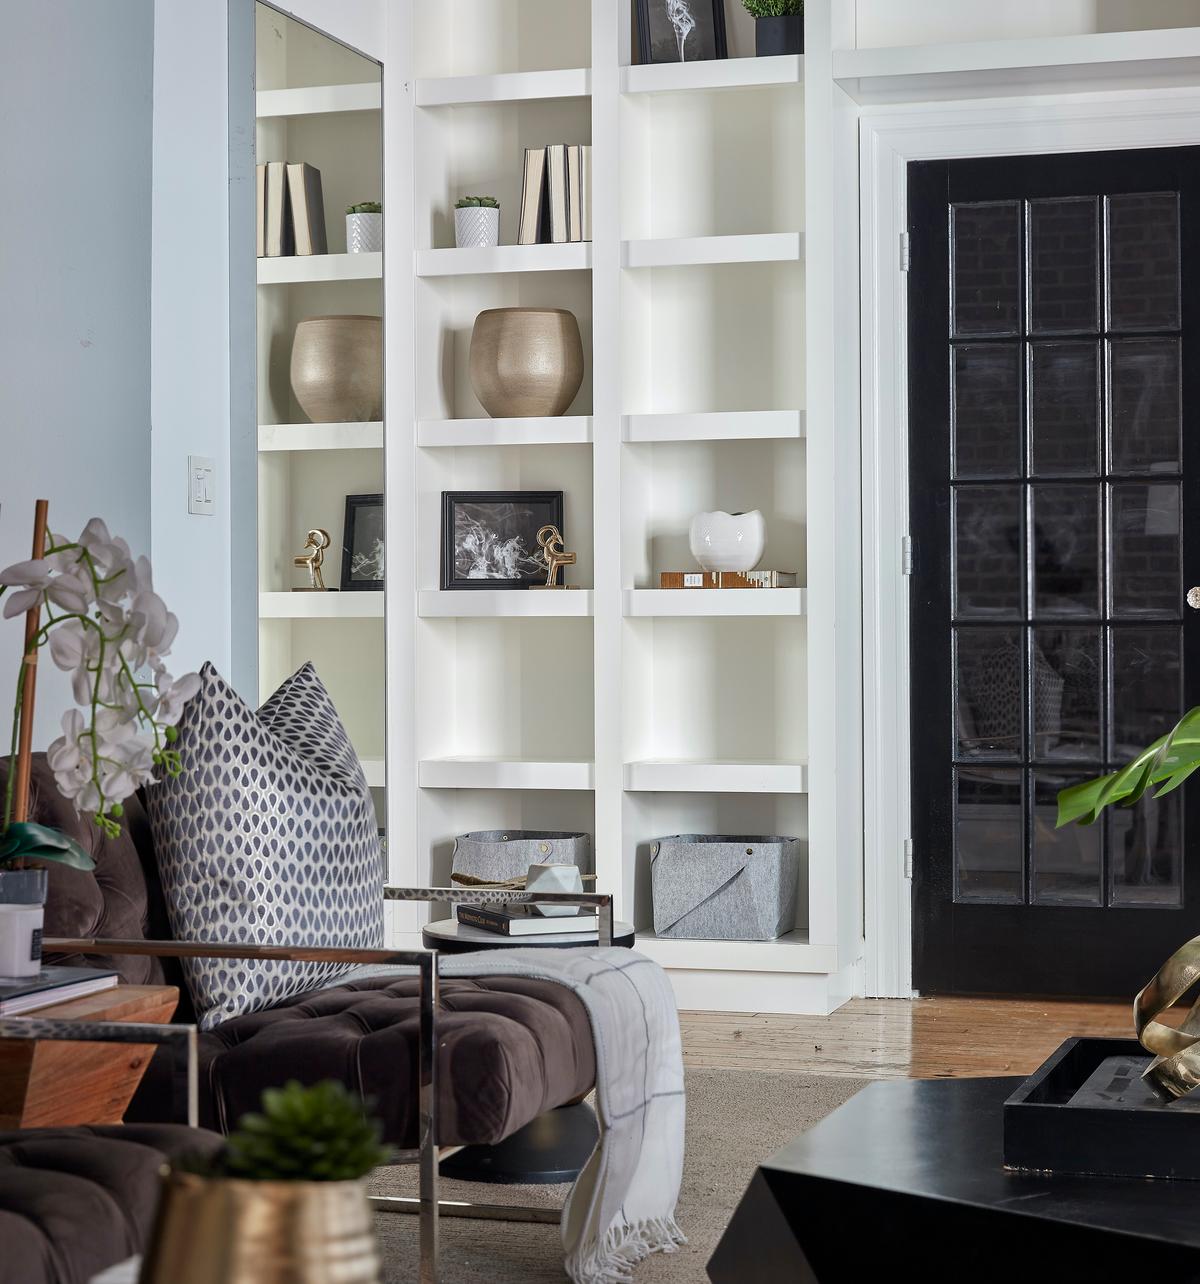 A living room bookcase is dressed with a mix of bins, vases, books, framed images and accents. (Scott Morris/Cathy Hobbs/TNS)